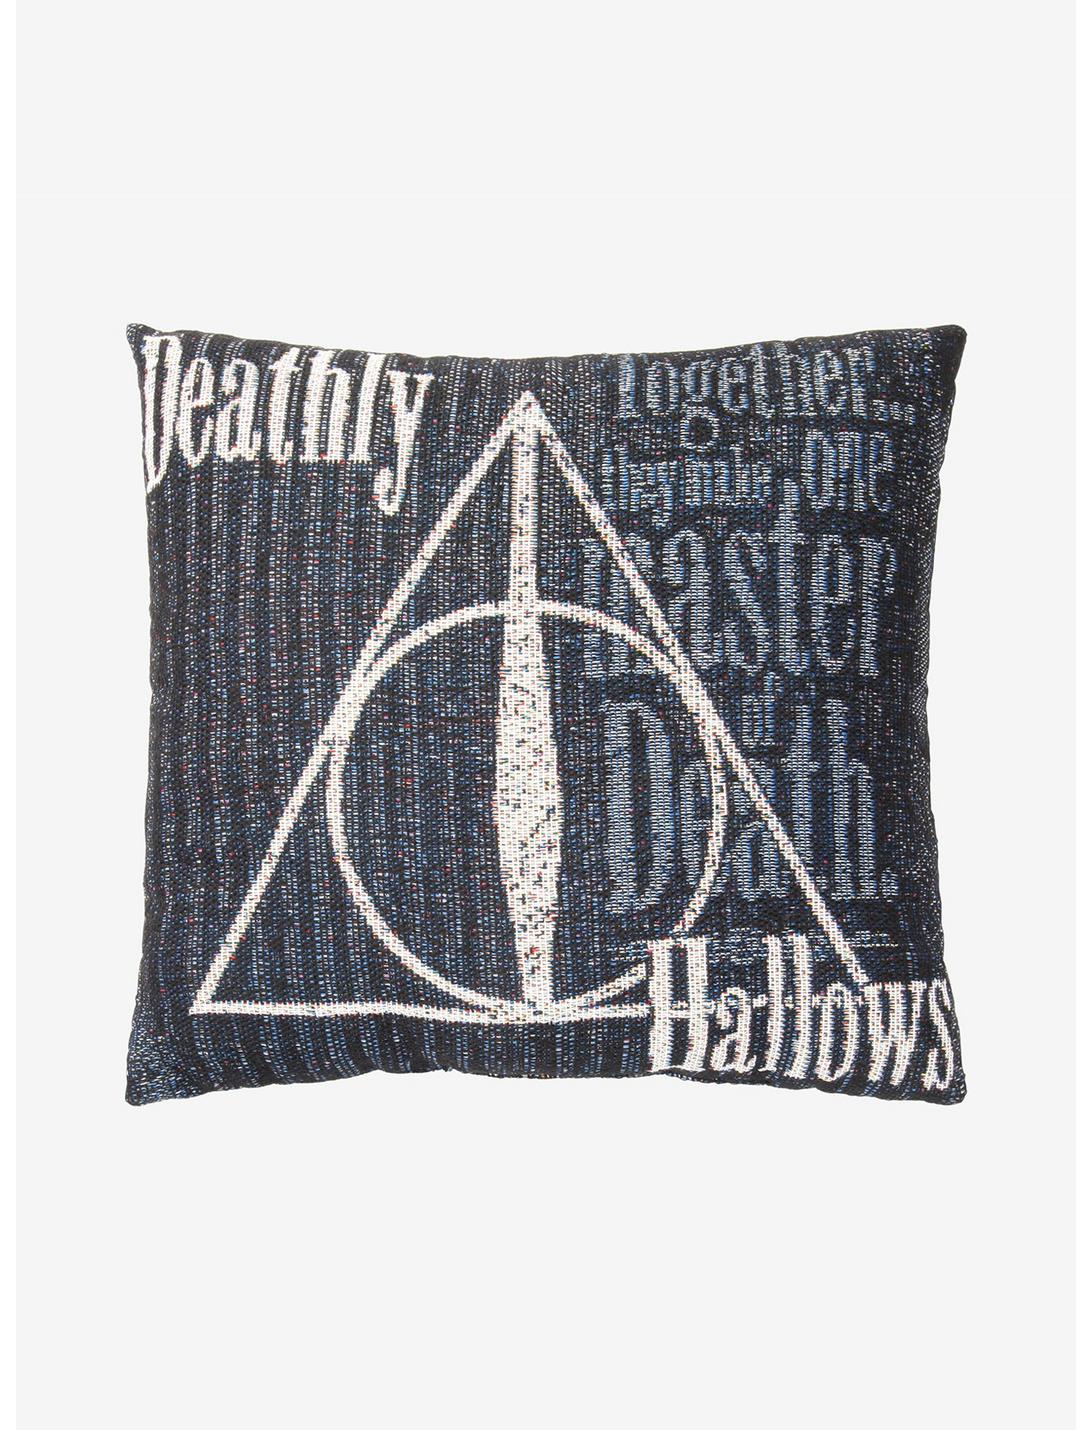 Harry Potter Deathly Hallows Tapestry Throw Pillow, , hi-res